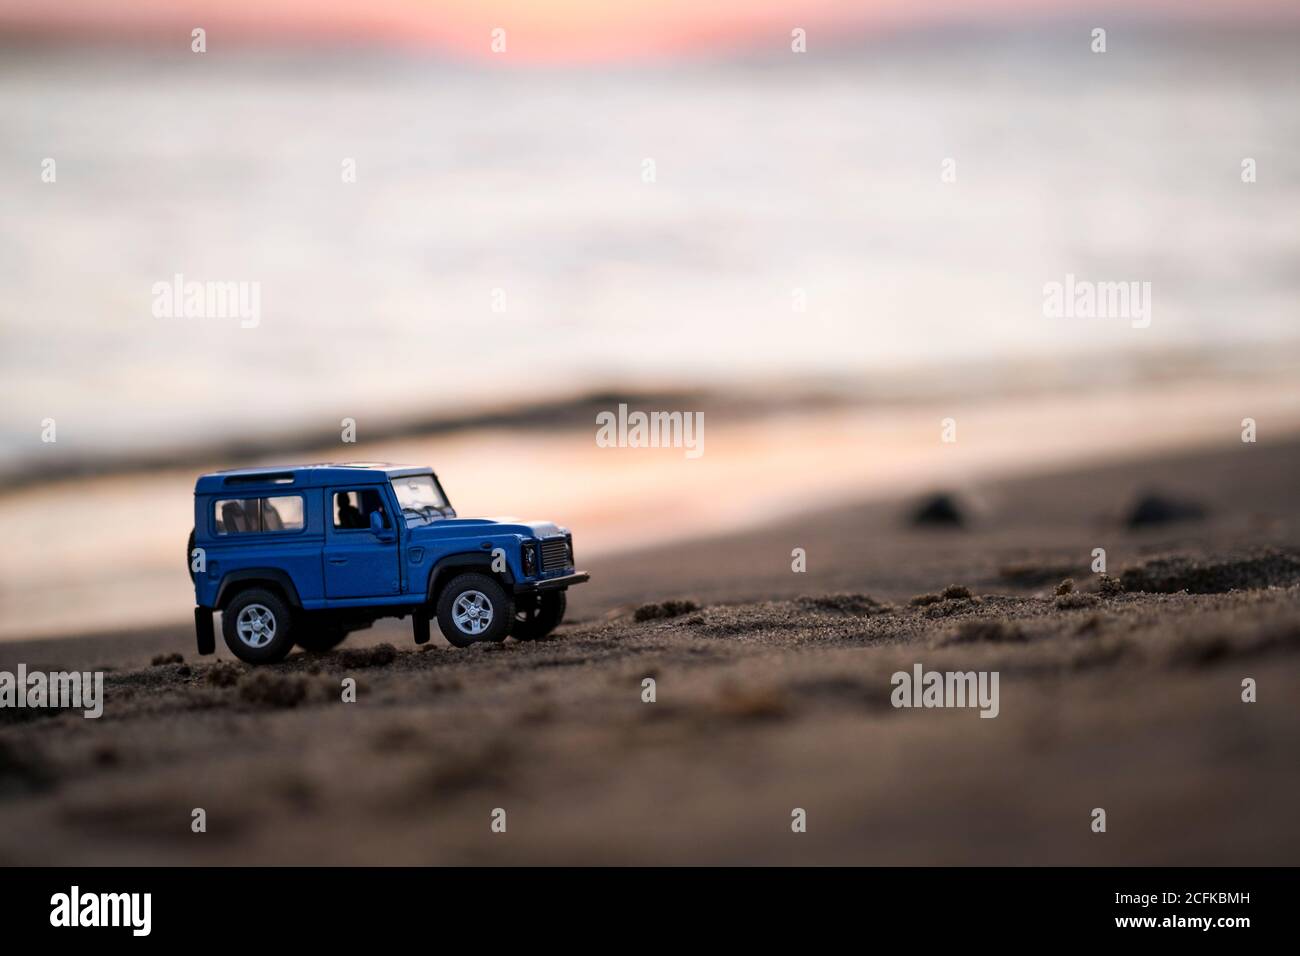 Izmir, Turkey - August 22, 2020: Close up shot of a Land Rover SUV vehicle on sand and on sunset. Stock Photo